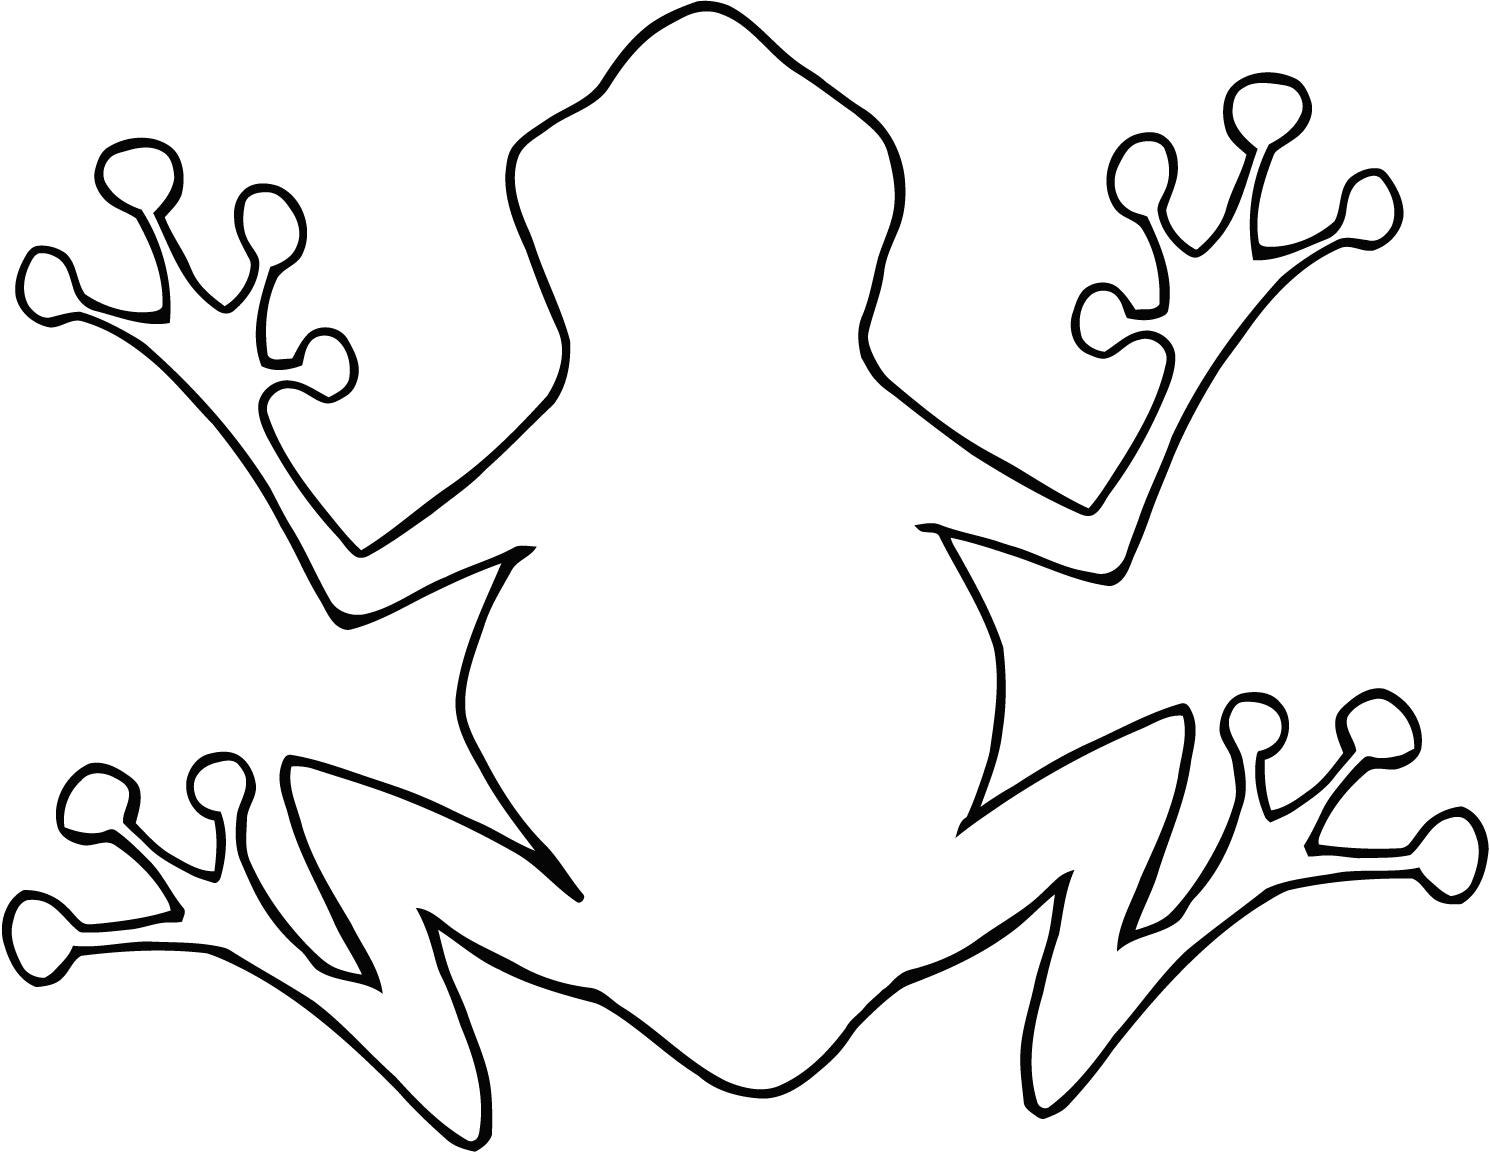 Coloring Sheet Of Cartoon Outline Frog For Kids   Coloring Point